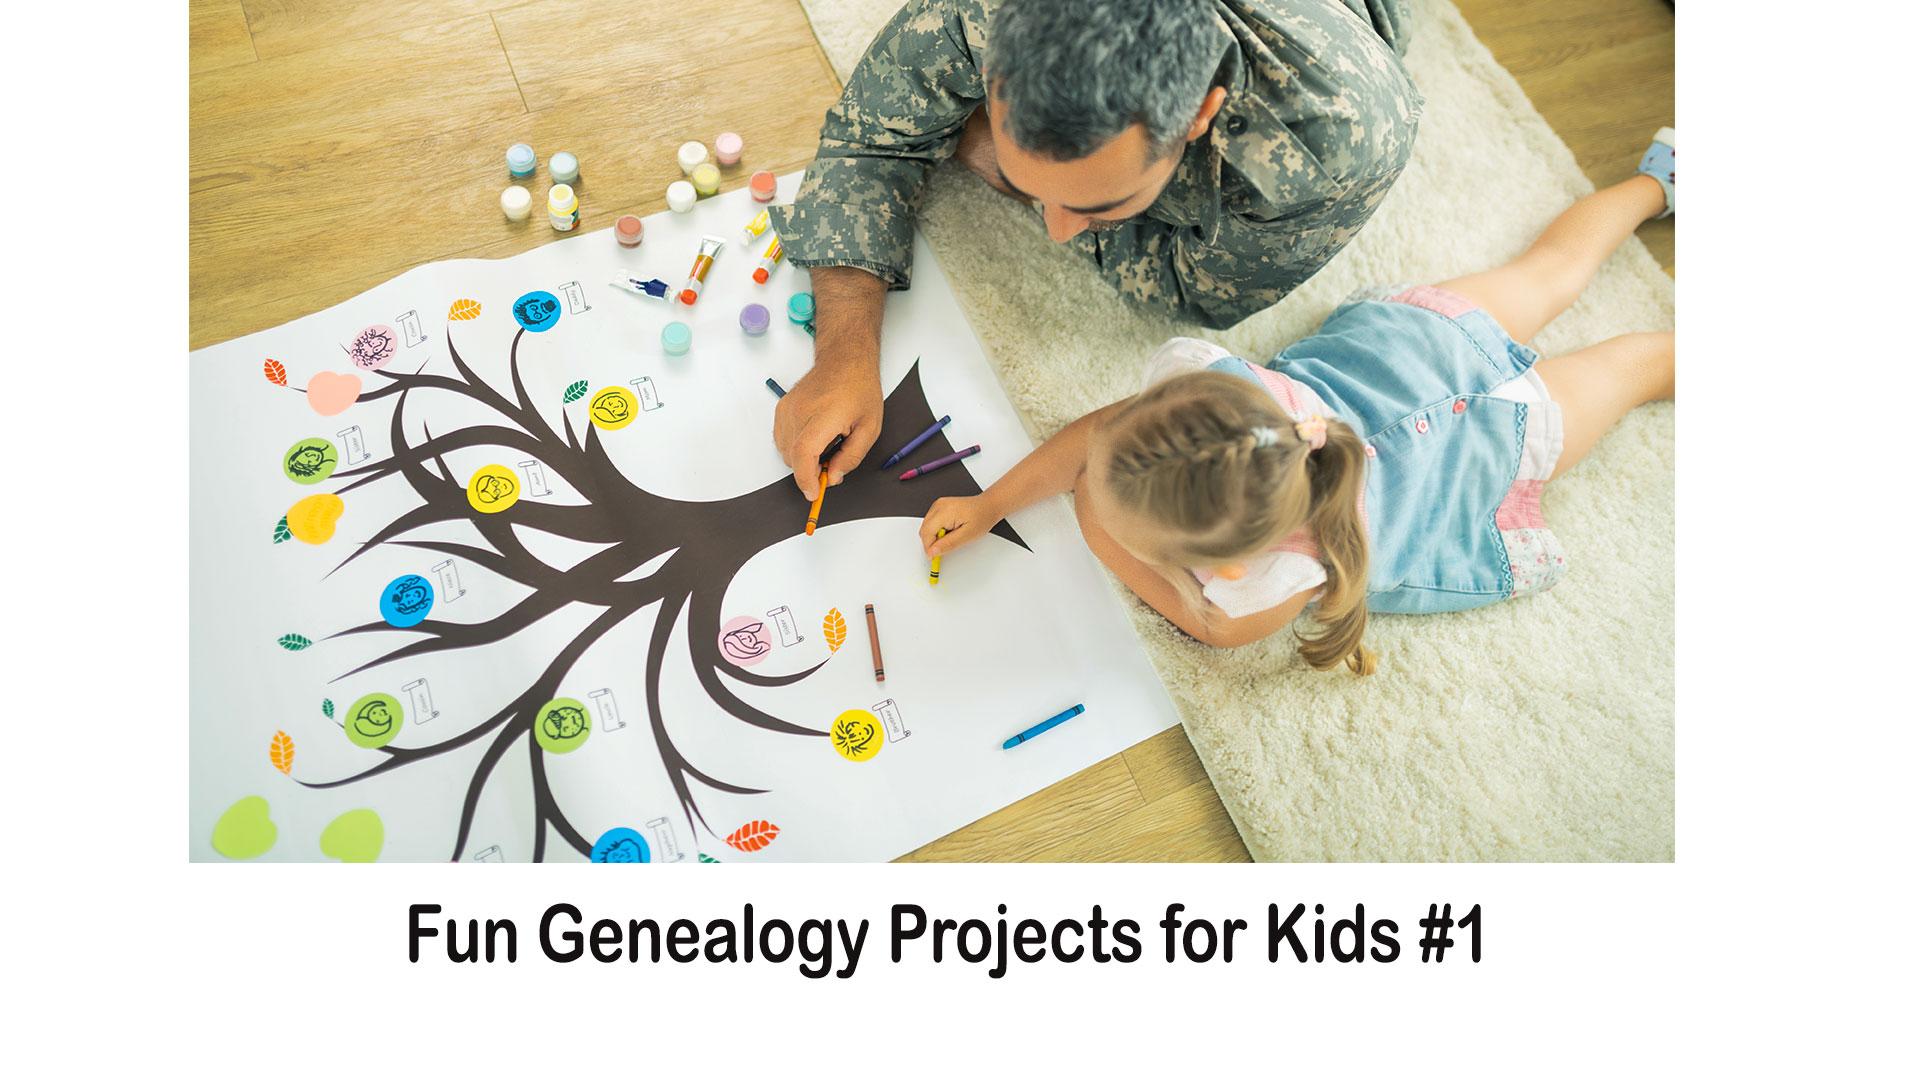 Fun Genealogy Projects for Kids #1